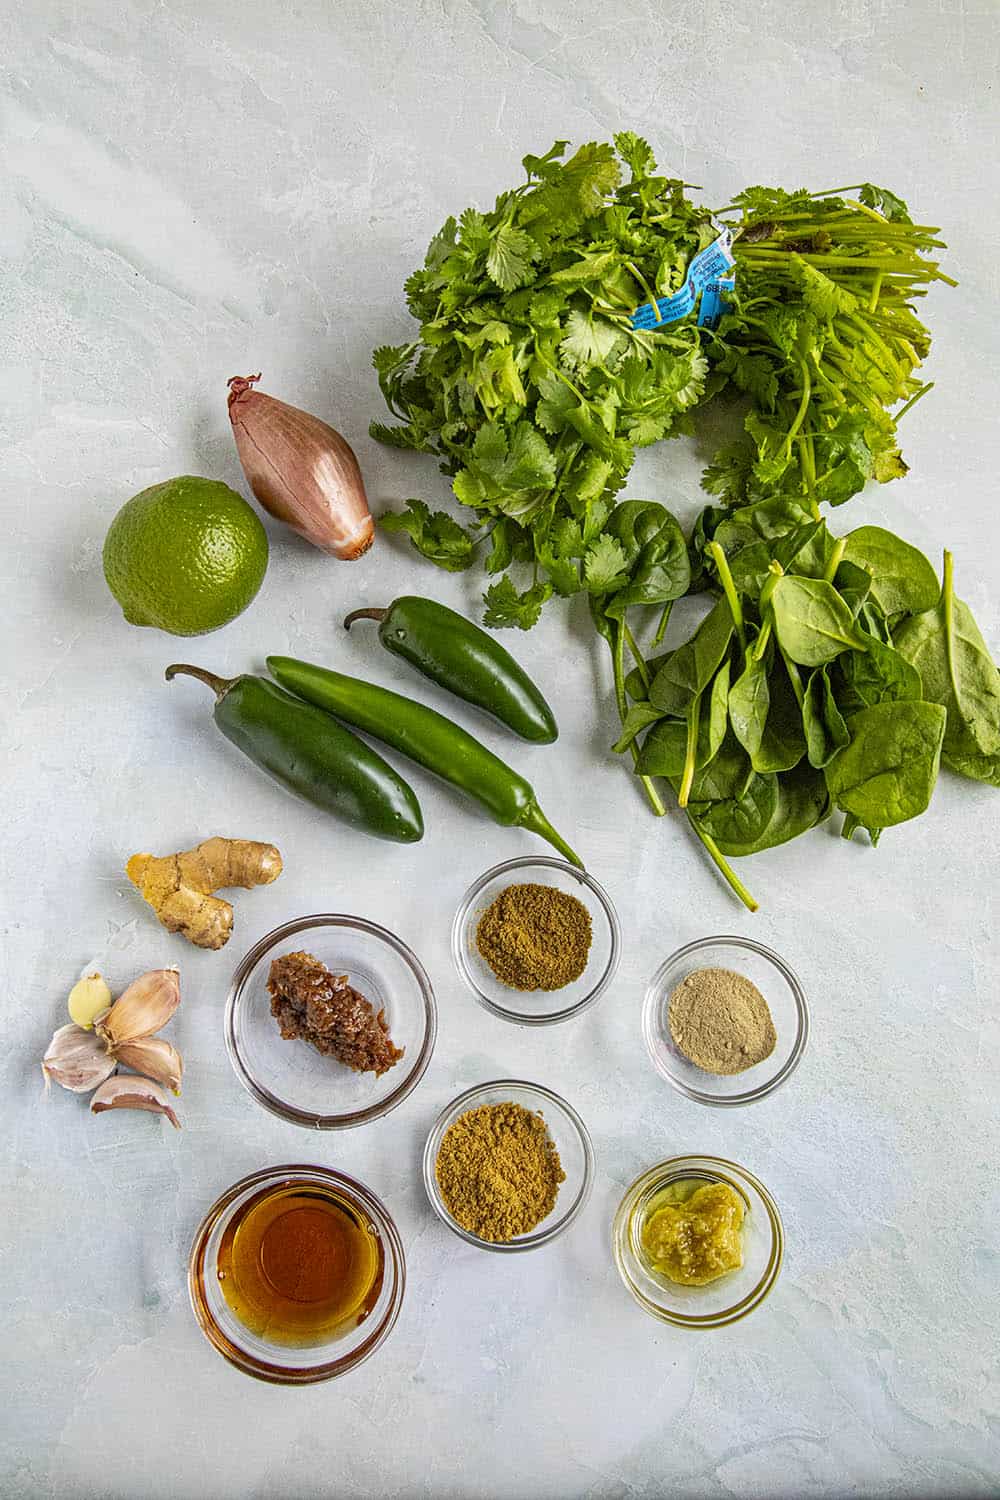 Ingredients for making Green Curry Paste